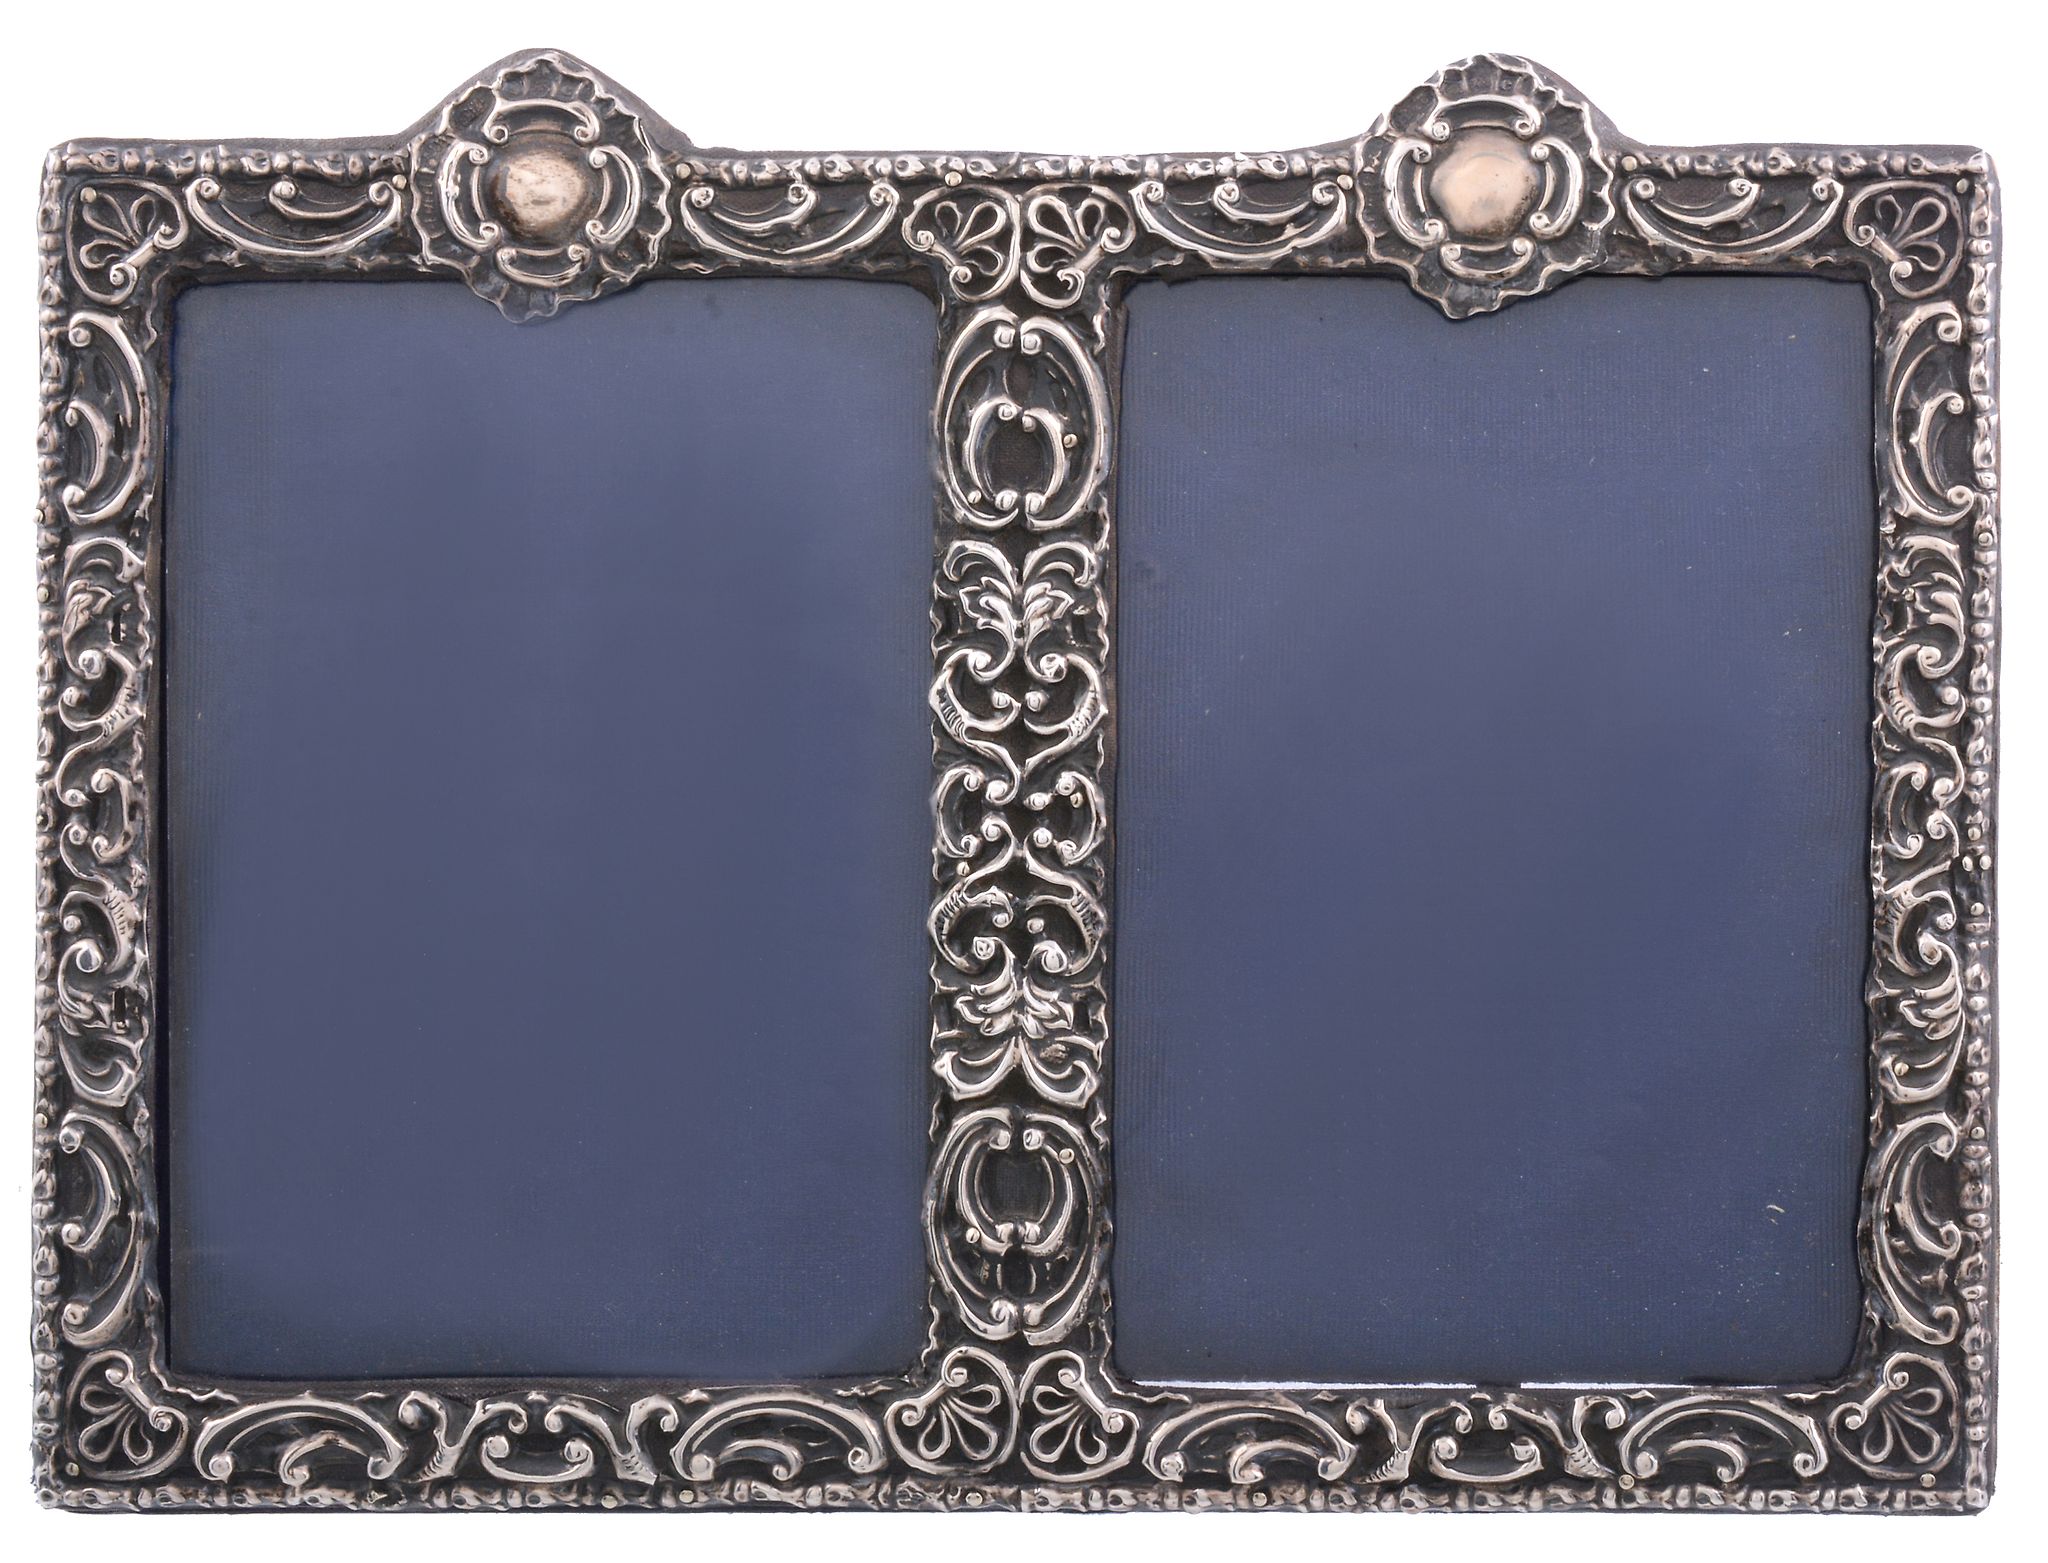 An Edwardian silver mounted double photograph frame, maker's mark J   An Edwardian silver mounted